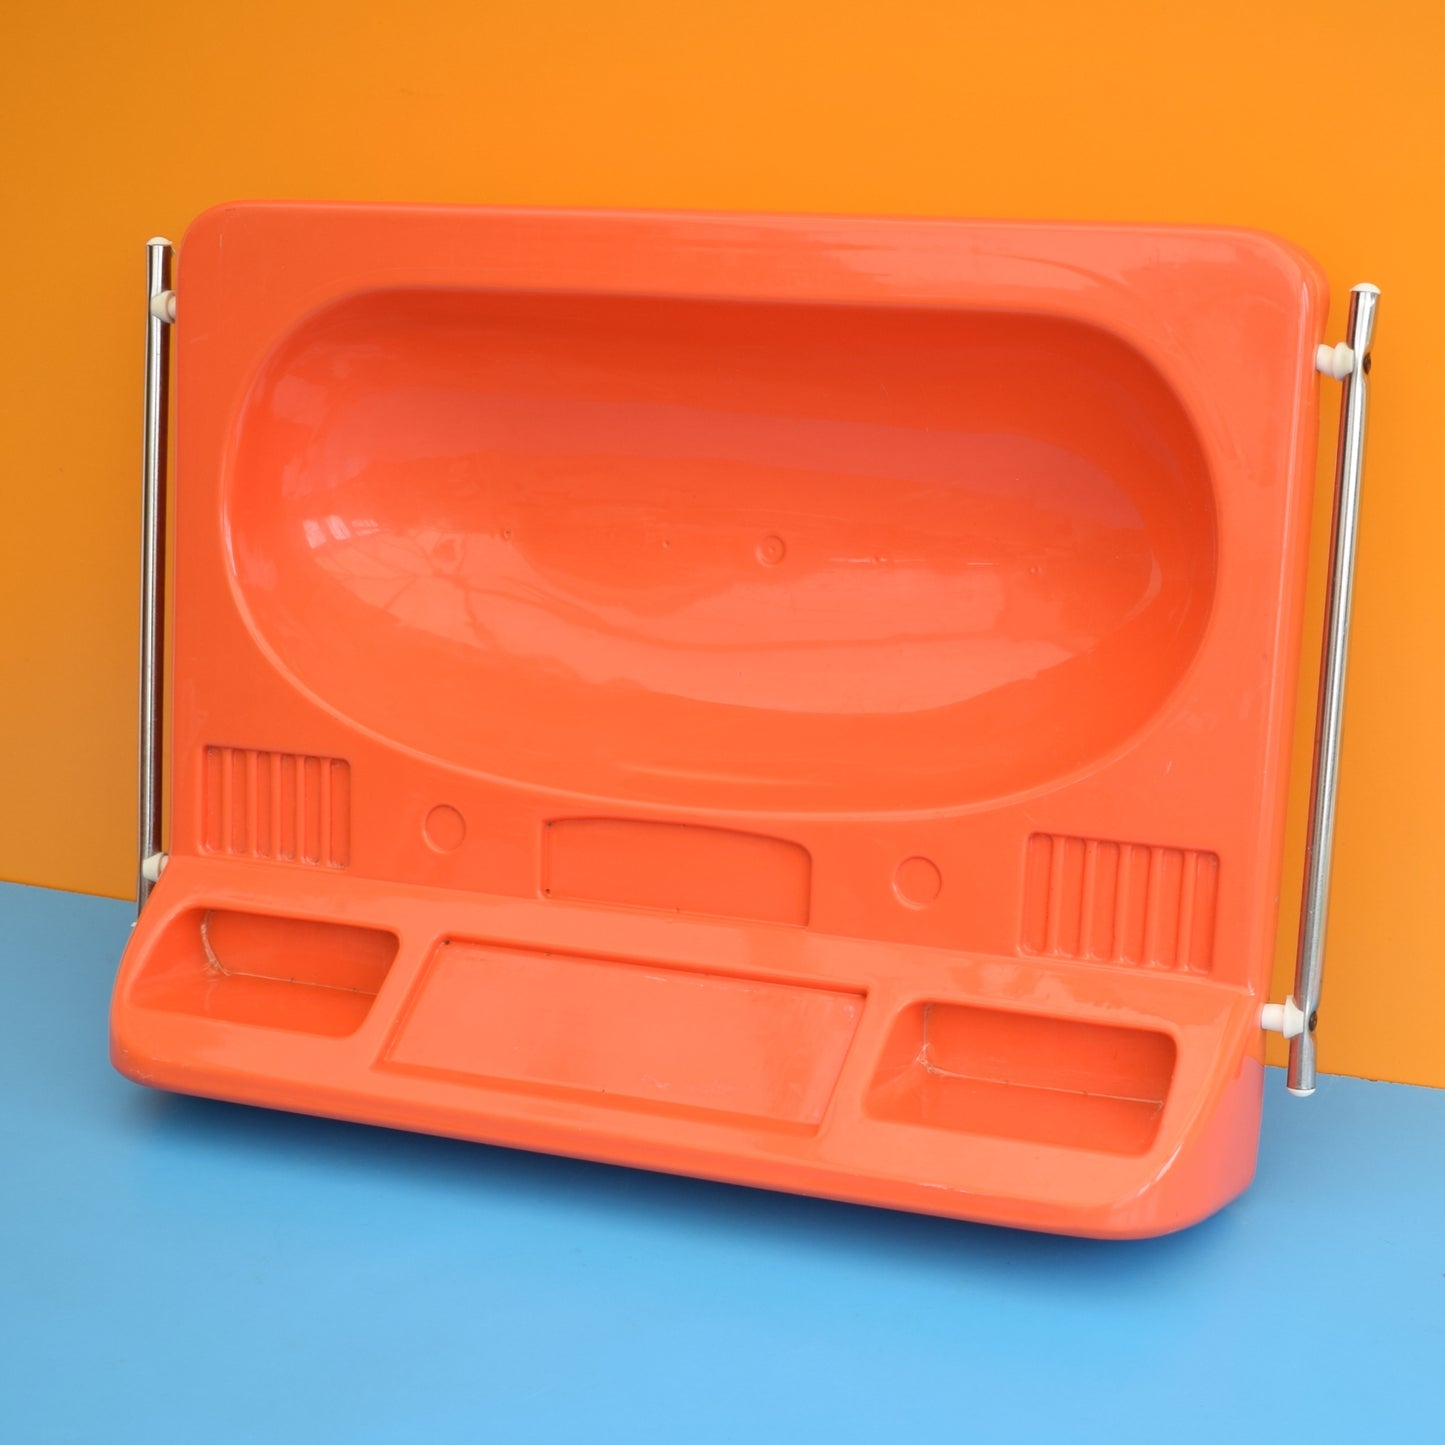 Vintage 1970s Plastic Childs/ Play Stand / Craft table? - Orange